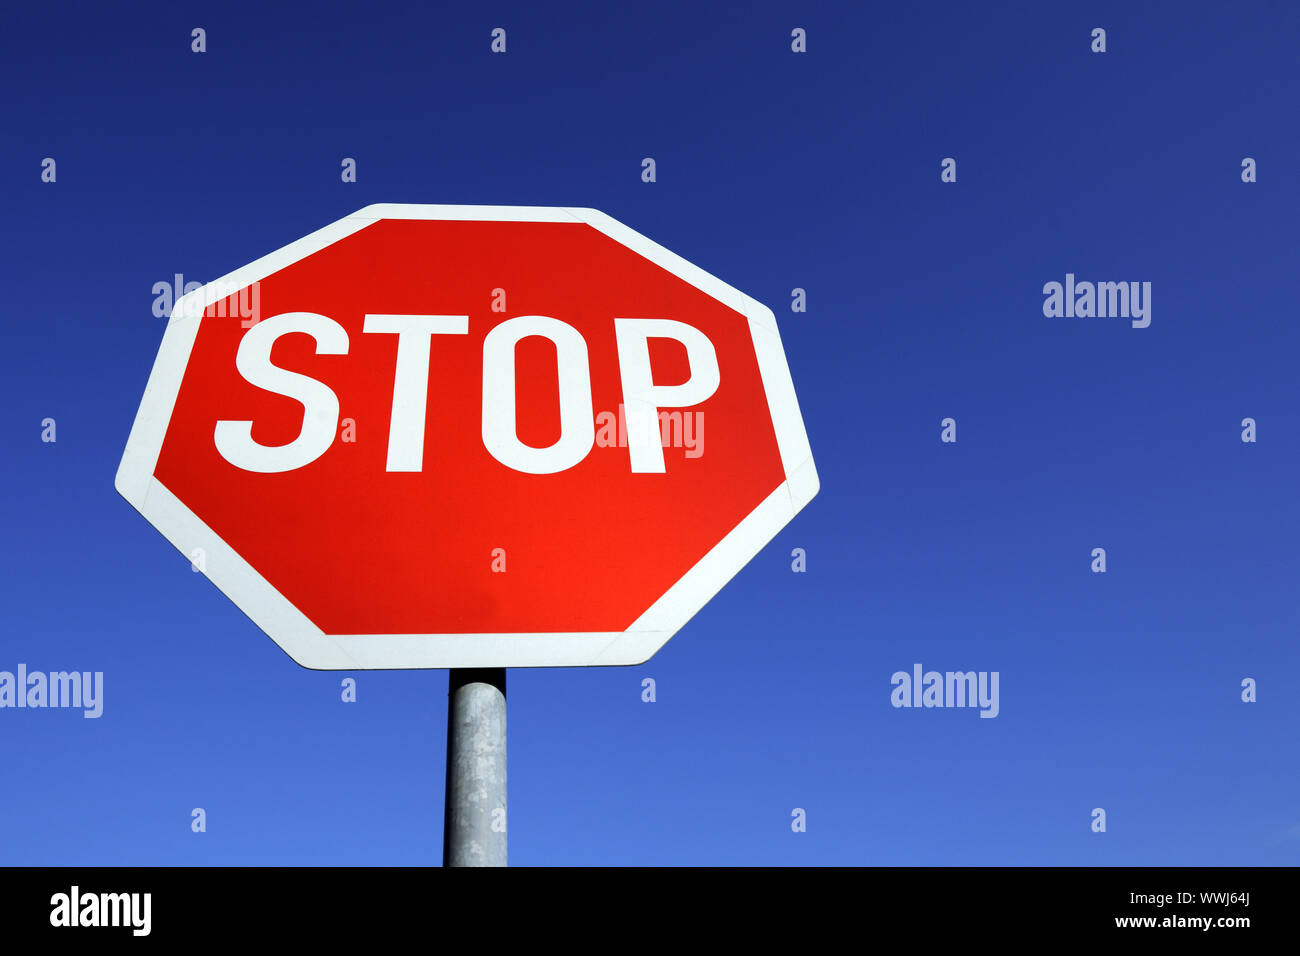 Stop sign in front of blue sky Stock Photo